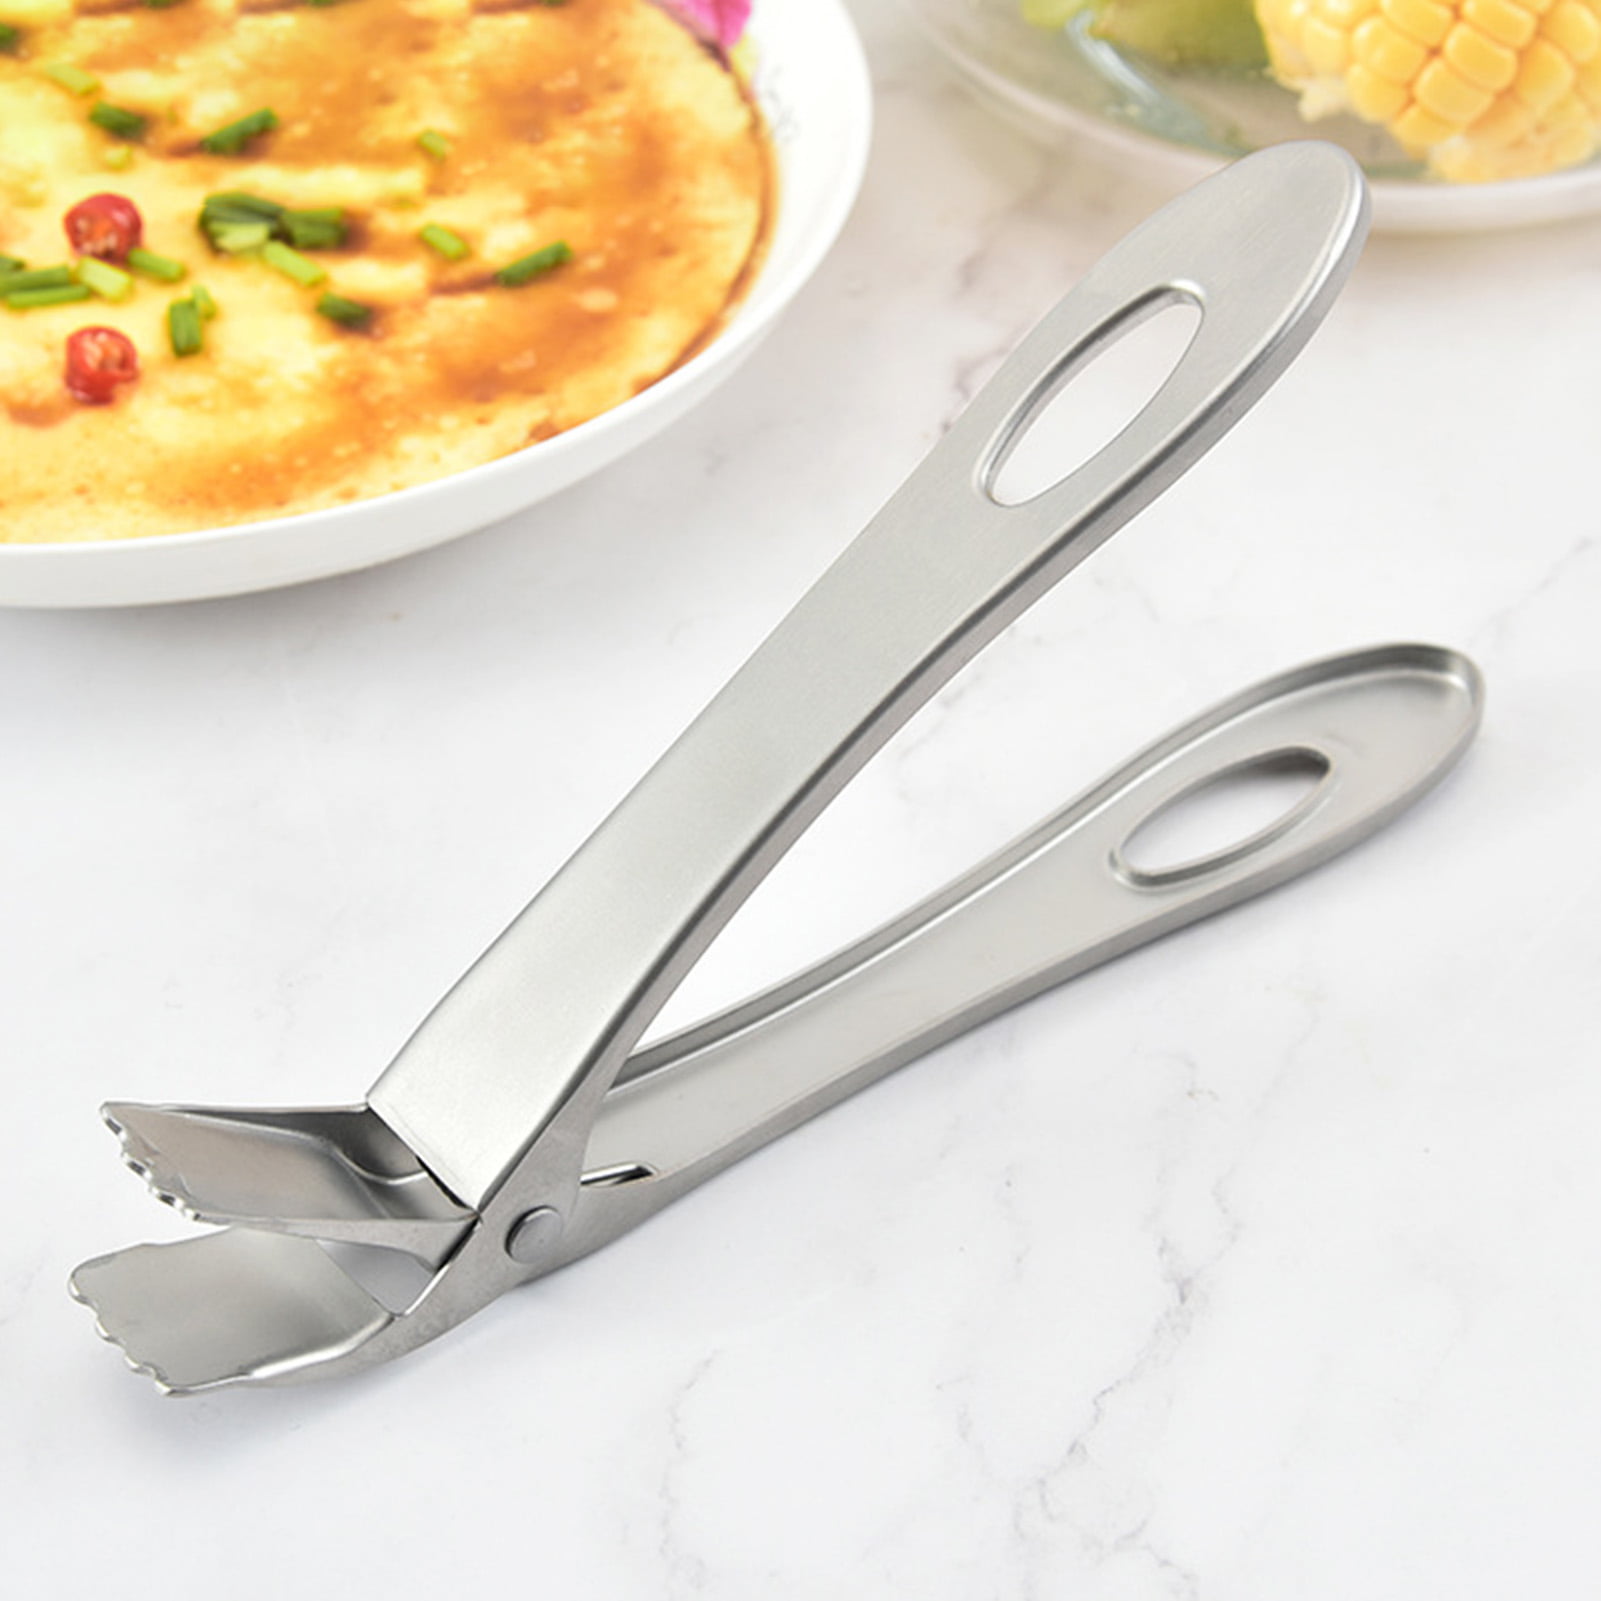 Foutou Universal Kitchen Stainless Steel Foldable Hot Dish Plate Bowl Clip Pots Gripper Crockery Holder Clamp Tongs